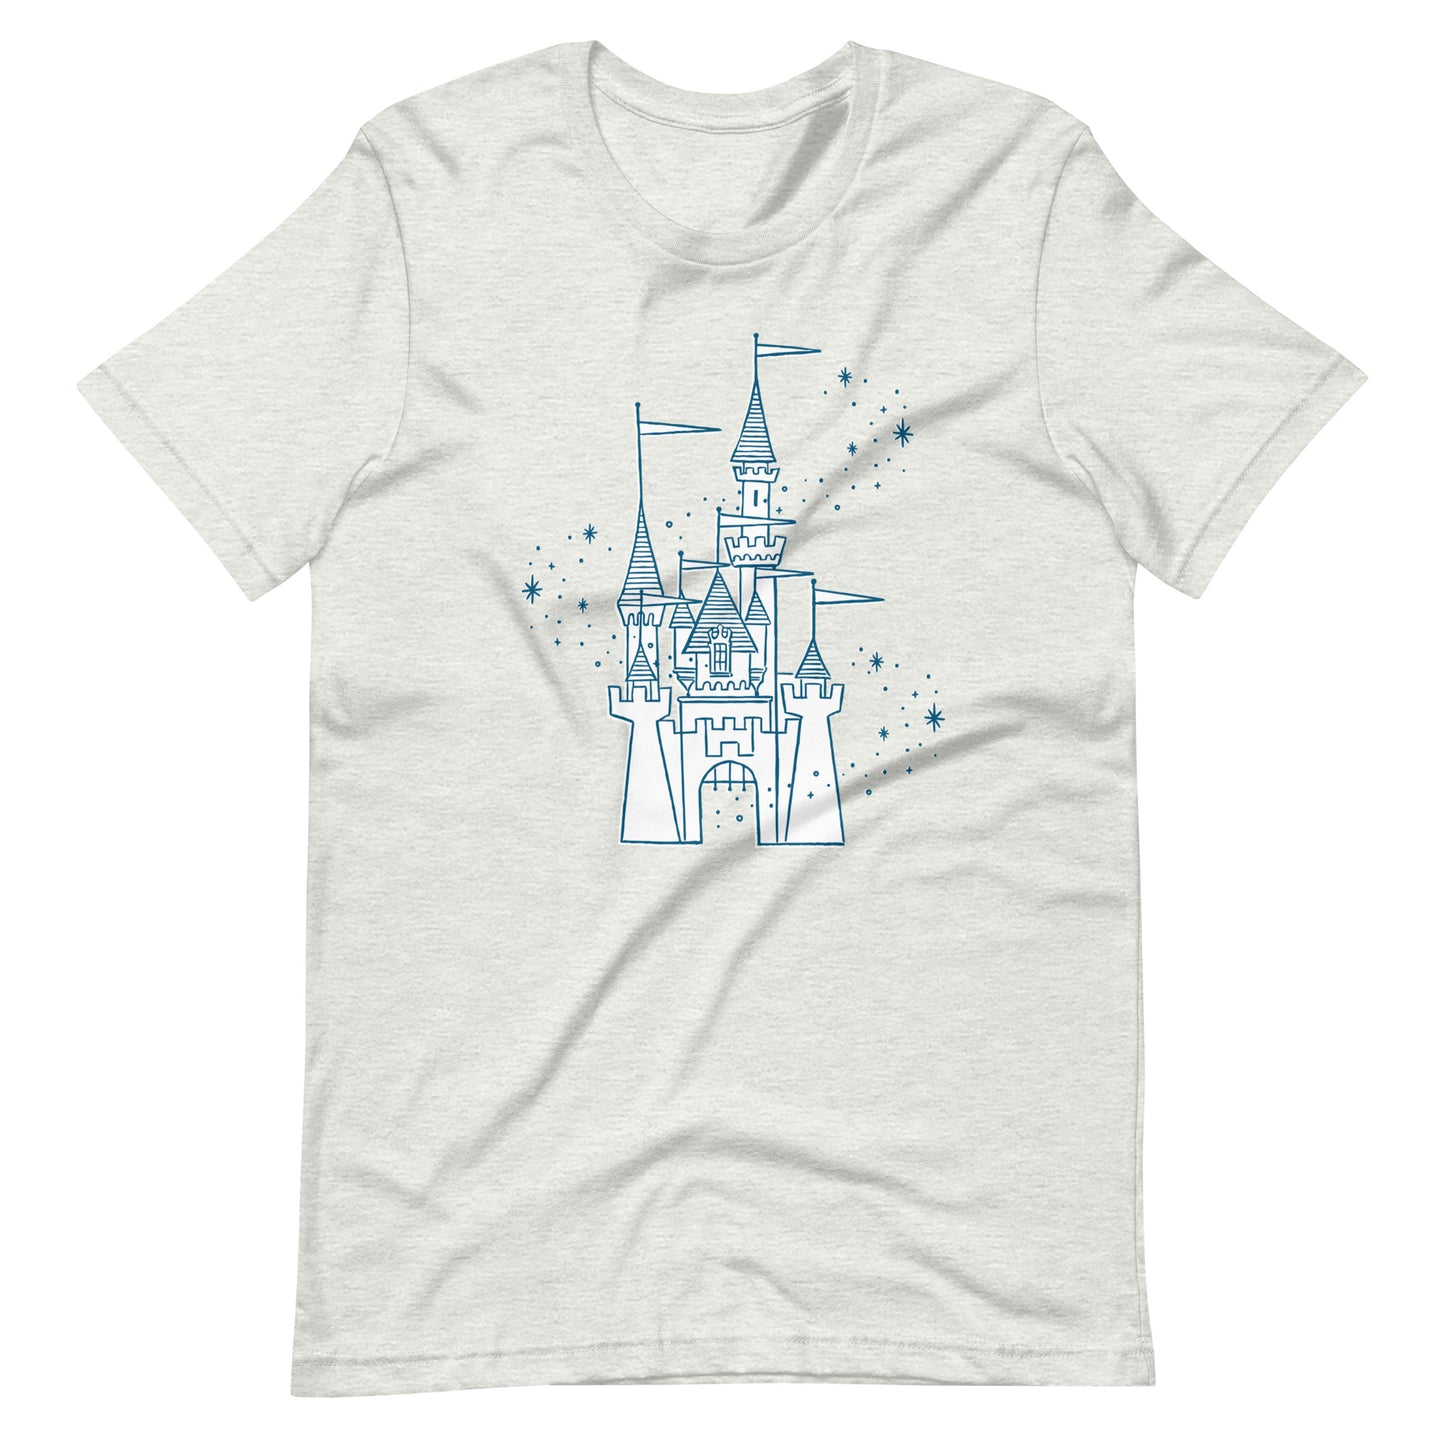 Heather ash colored shirt printed with vintage style sketch of a castle and pixie dust around the castle.